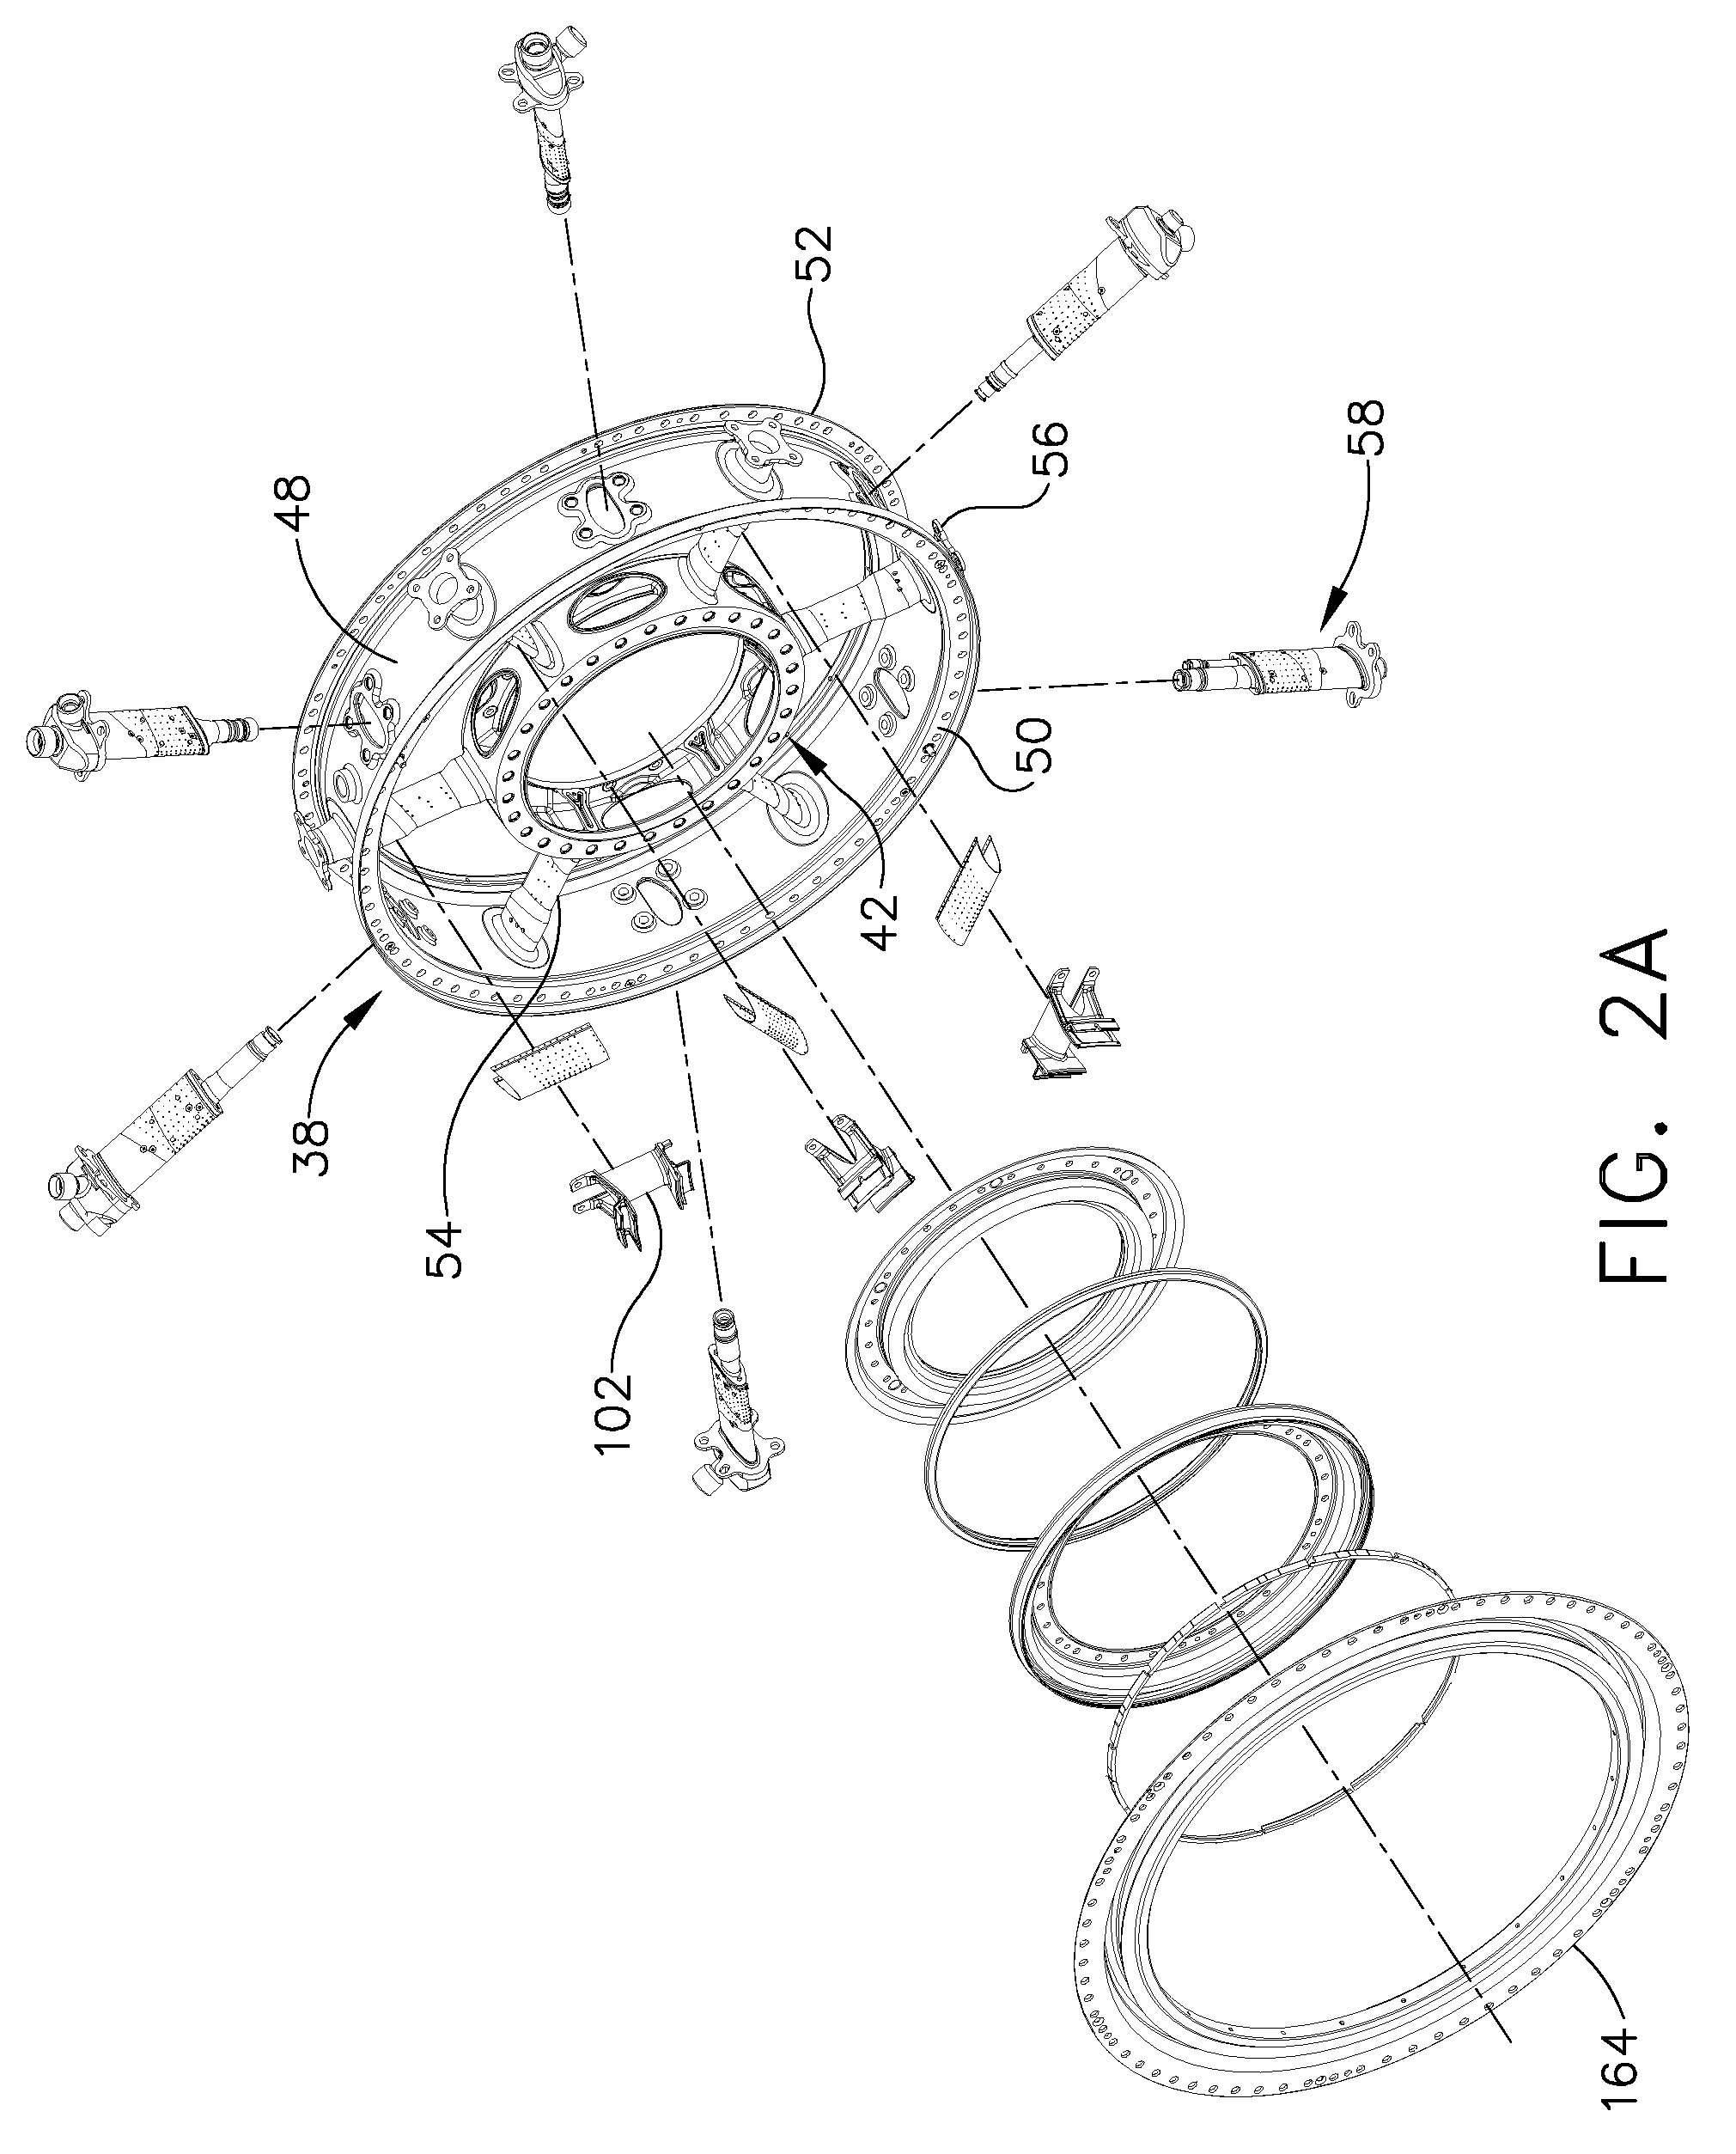 Turbine frame assembly and method for a gas turbine engine